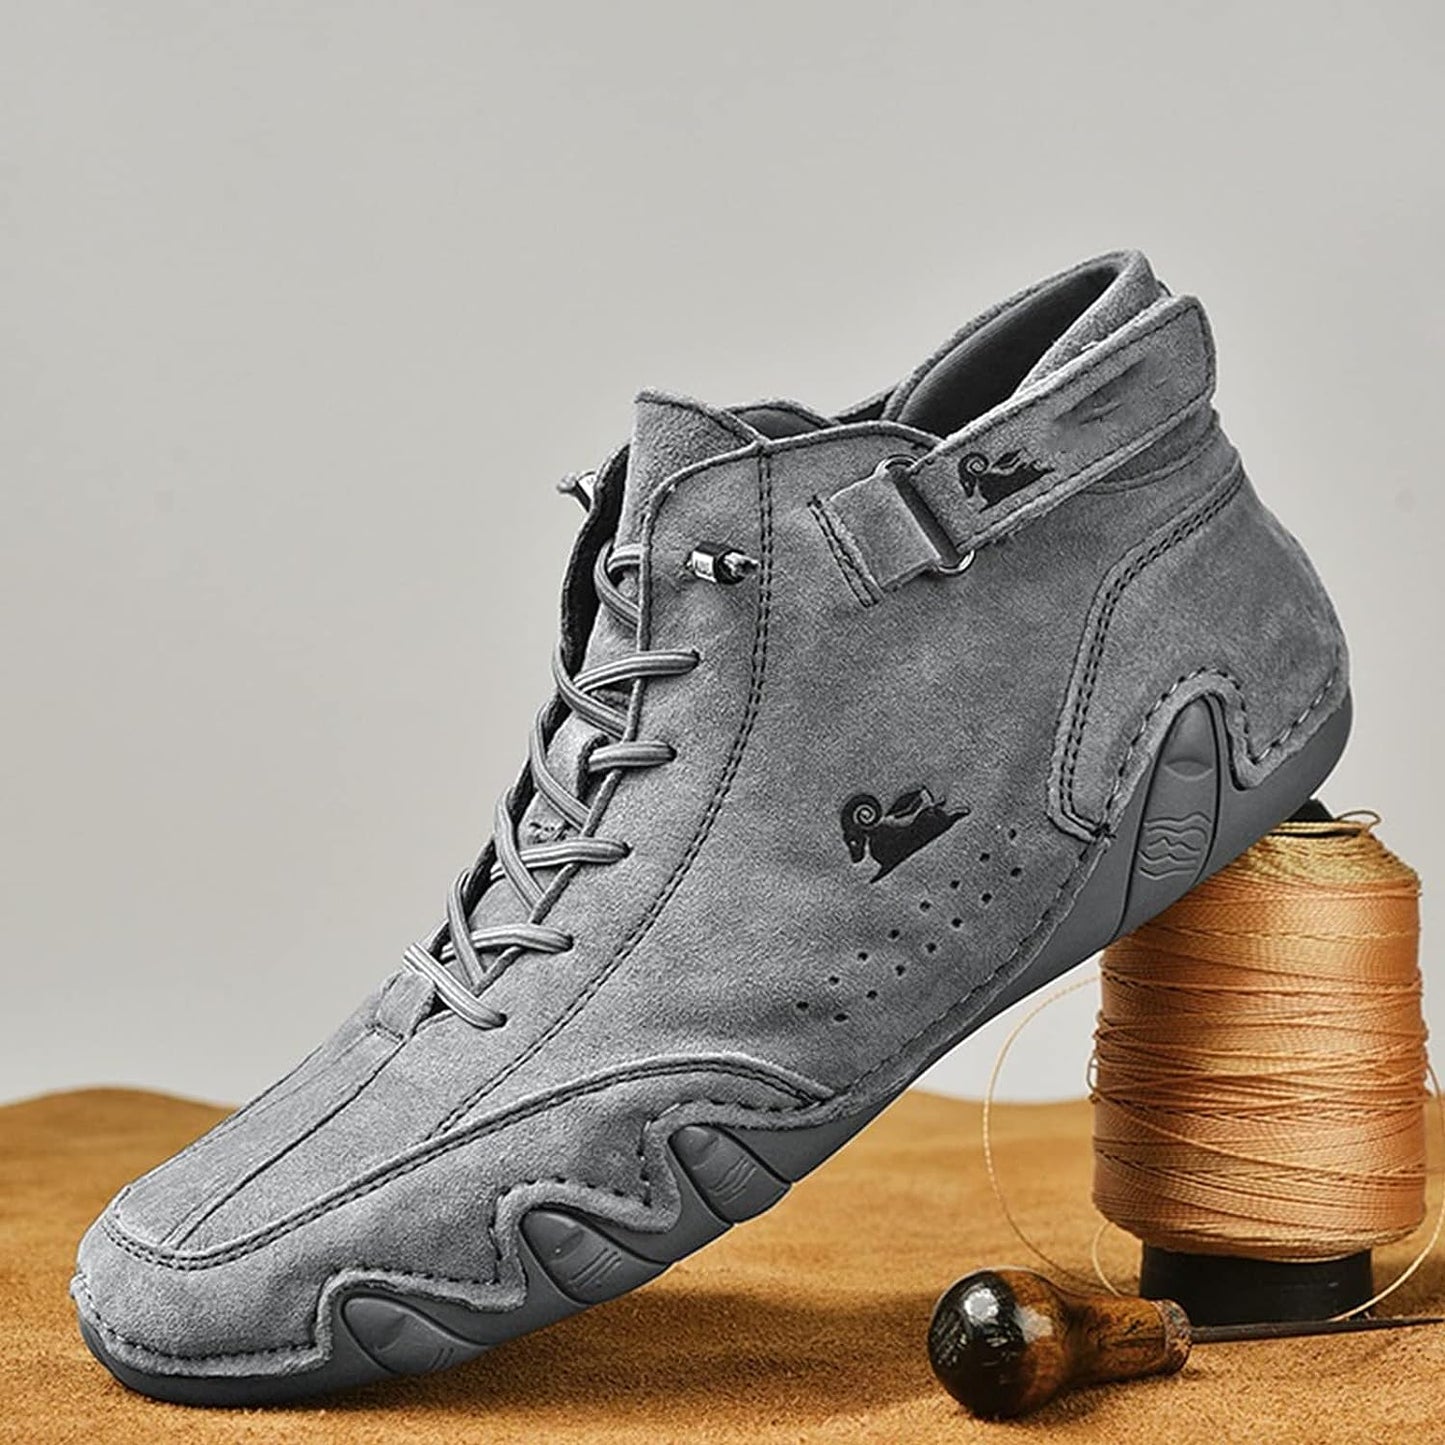 Handcrafted Branded Italian Shoes  - Stylish, Casual & Lightweight